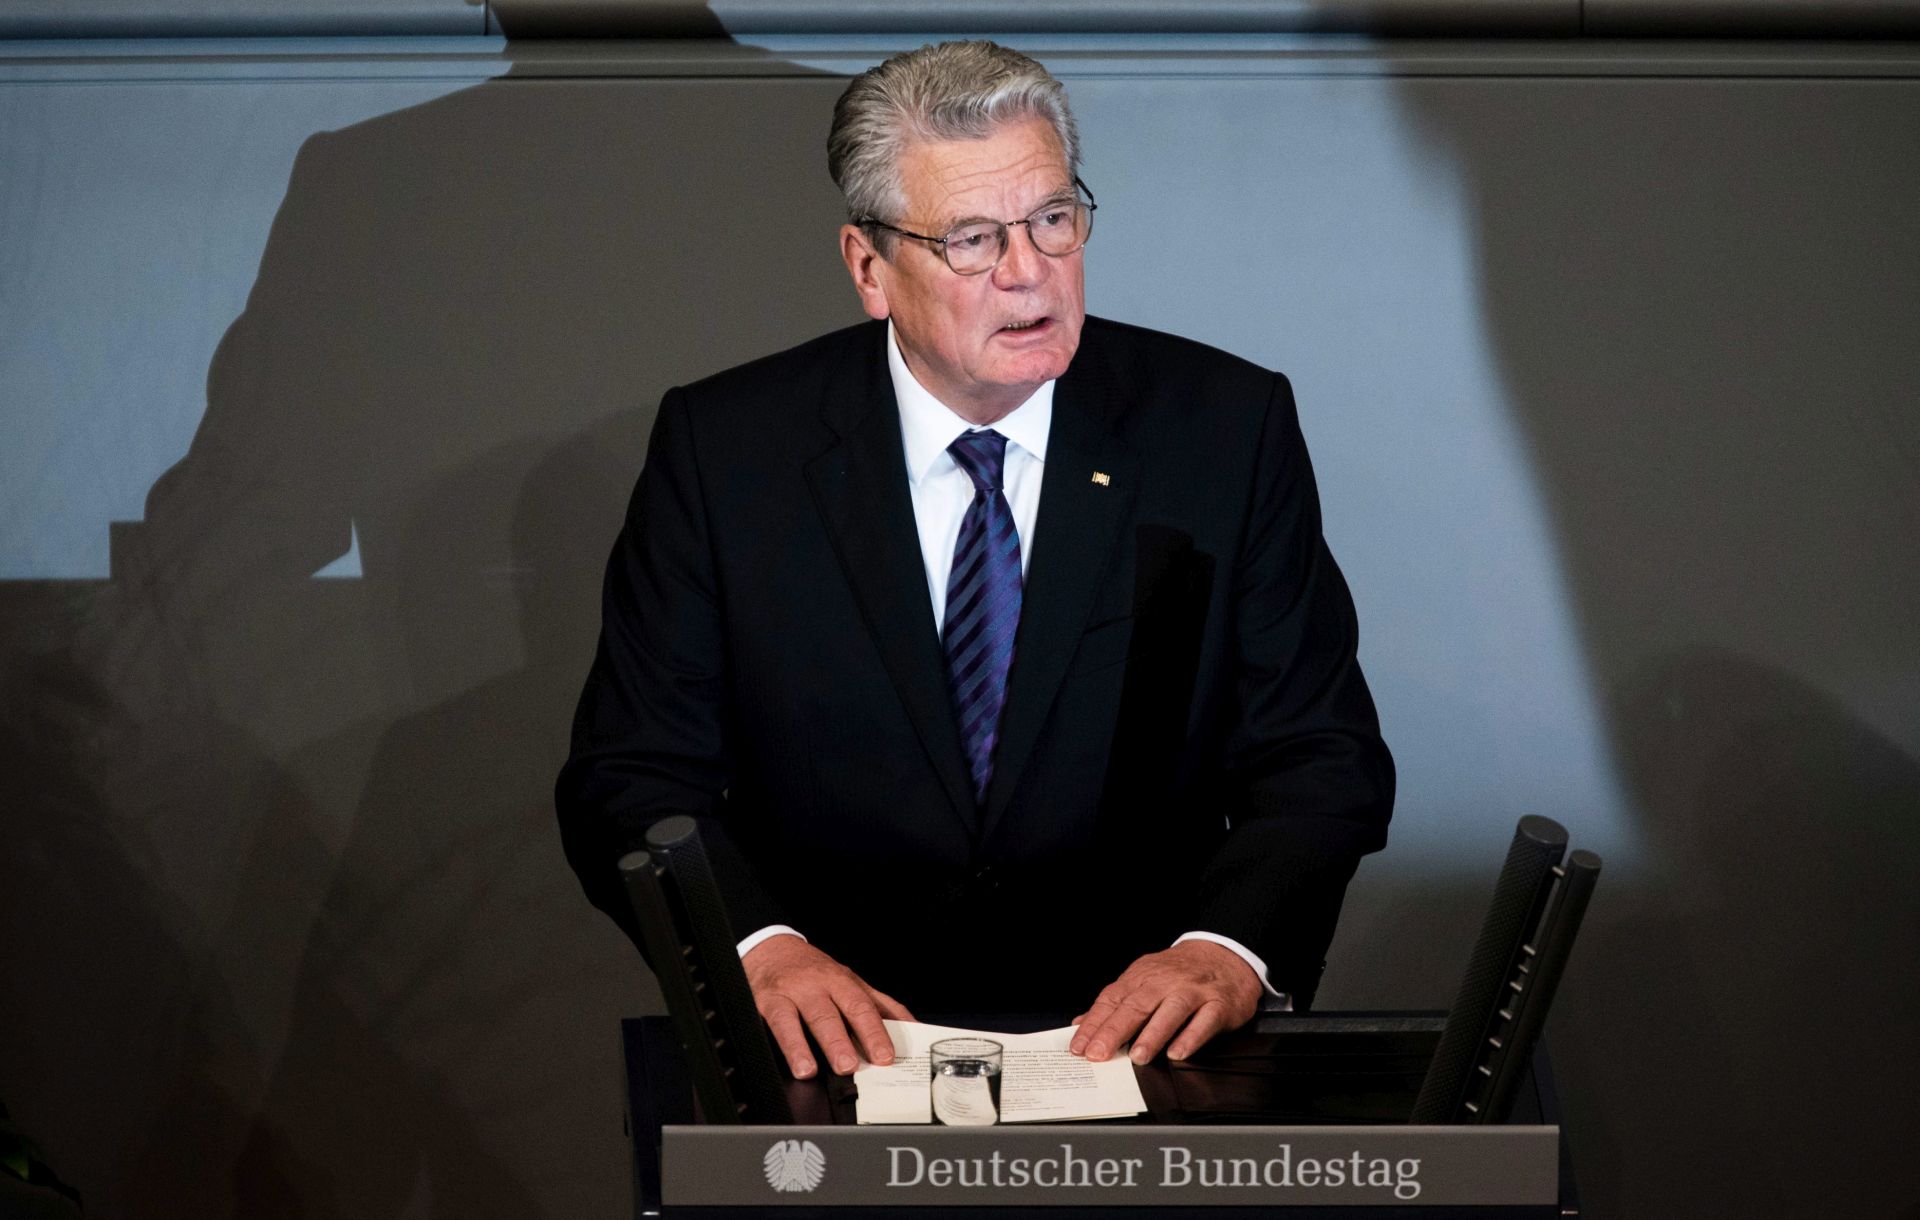 epa05026729 German President Joachim Gauck speaks during the central memorial event of the German War Graves Commission at remembrance Day in the German Bundestag in Berlin, Germany, 15 November 2015.  EPA/GREGOR FISCHER